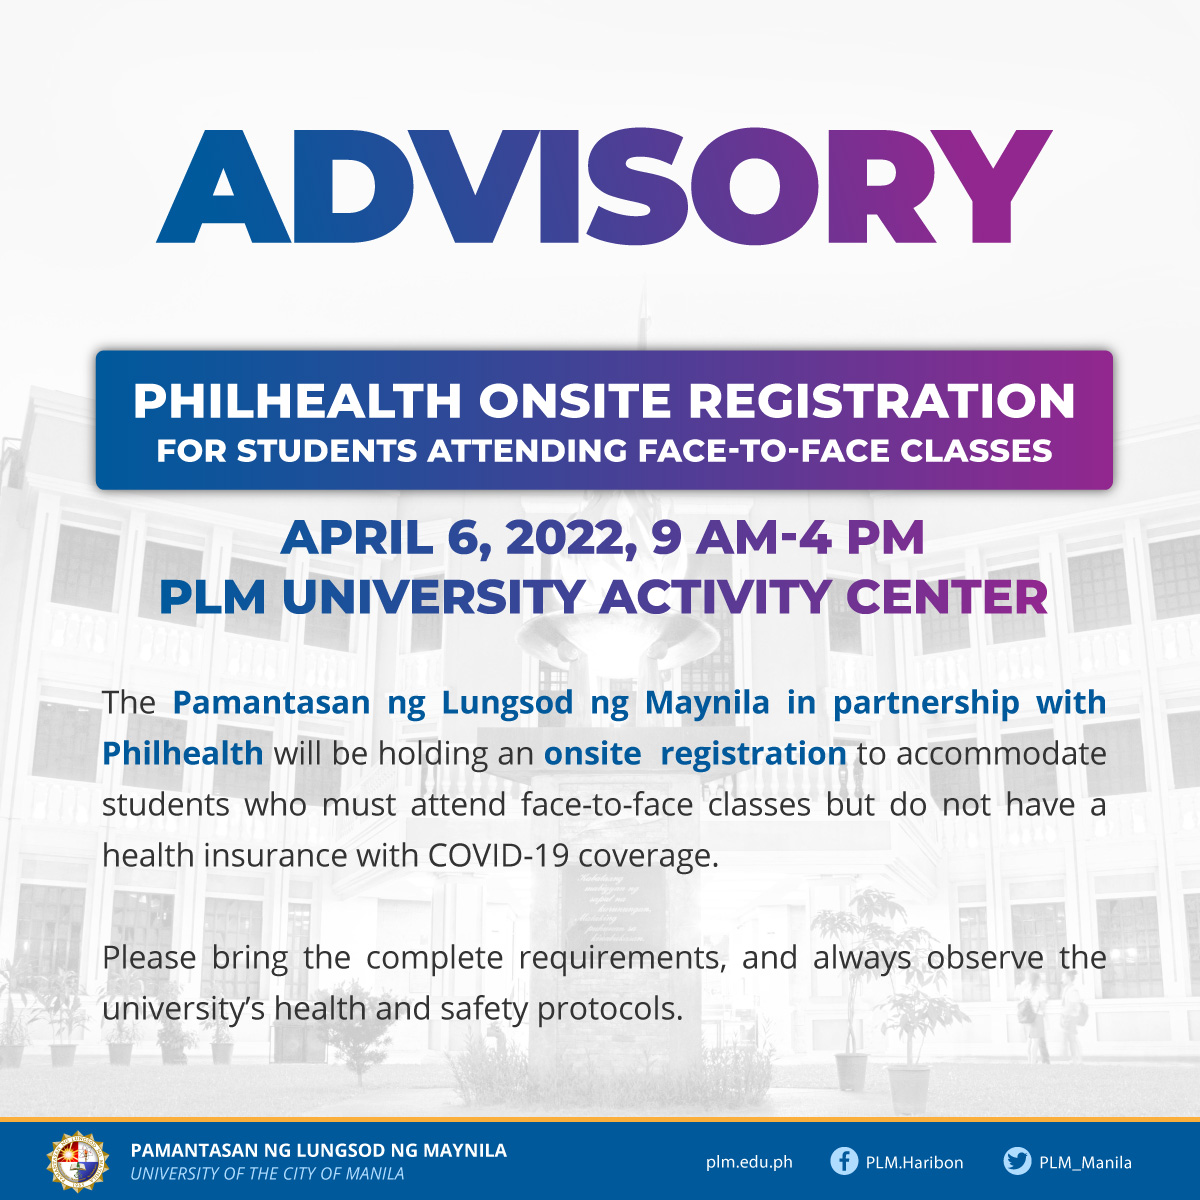 PLM to hold onsite Philhealth registration for students on April 6, 2022